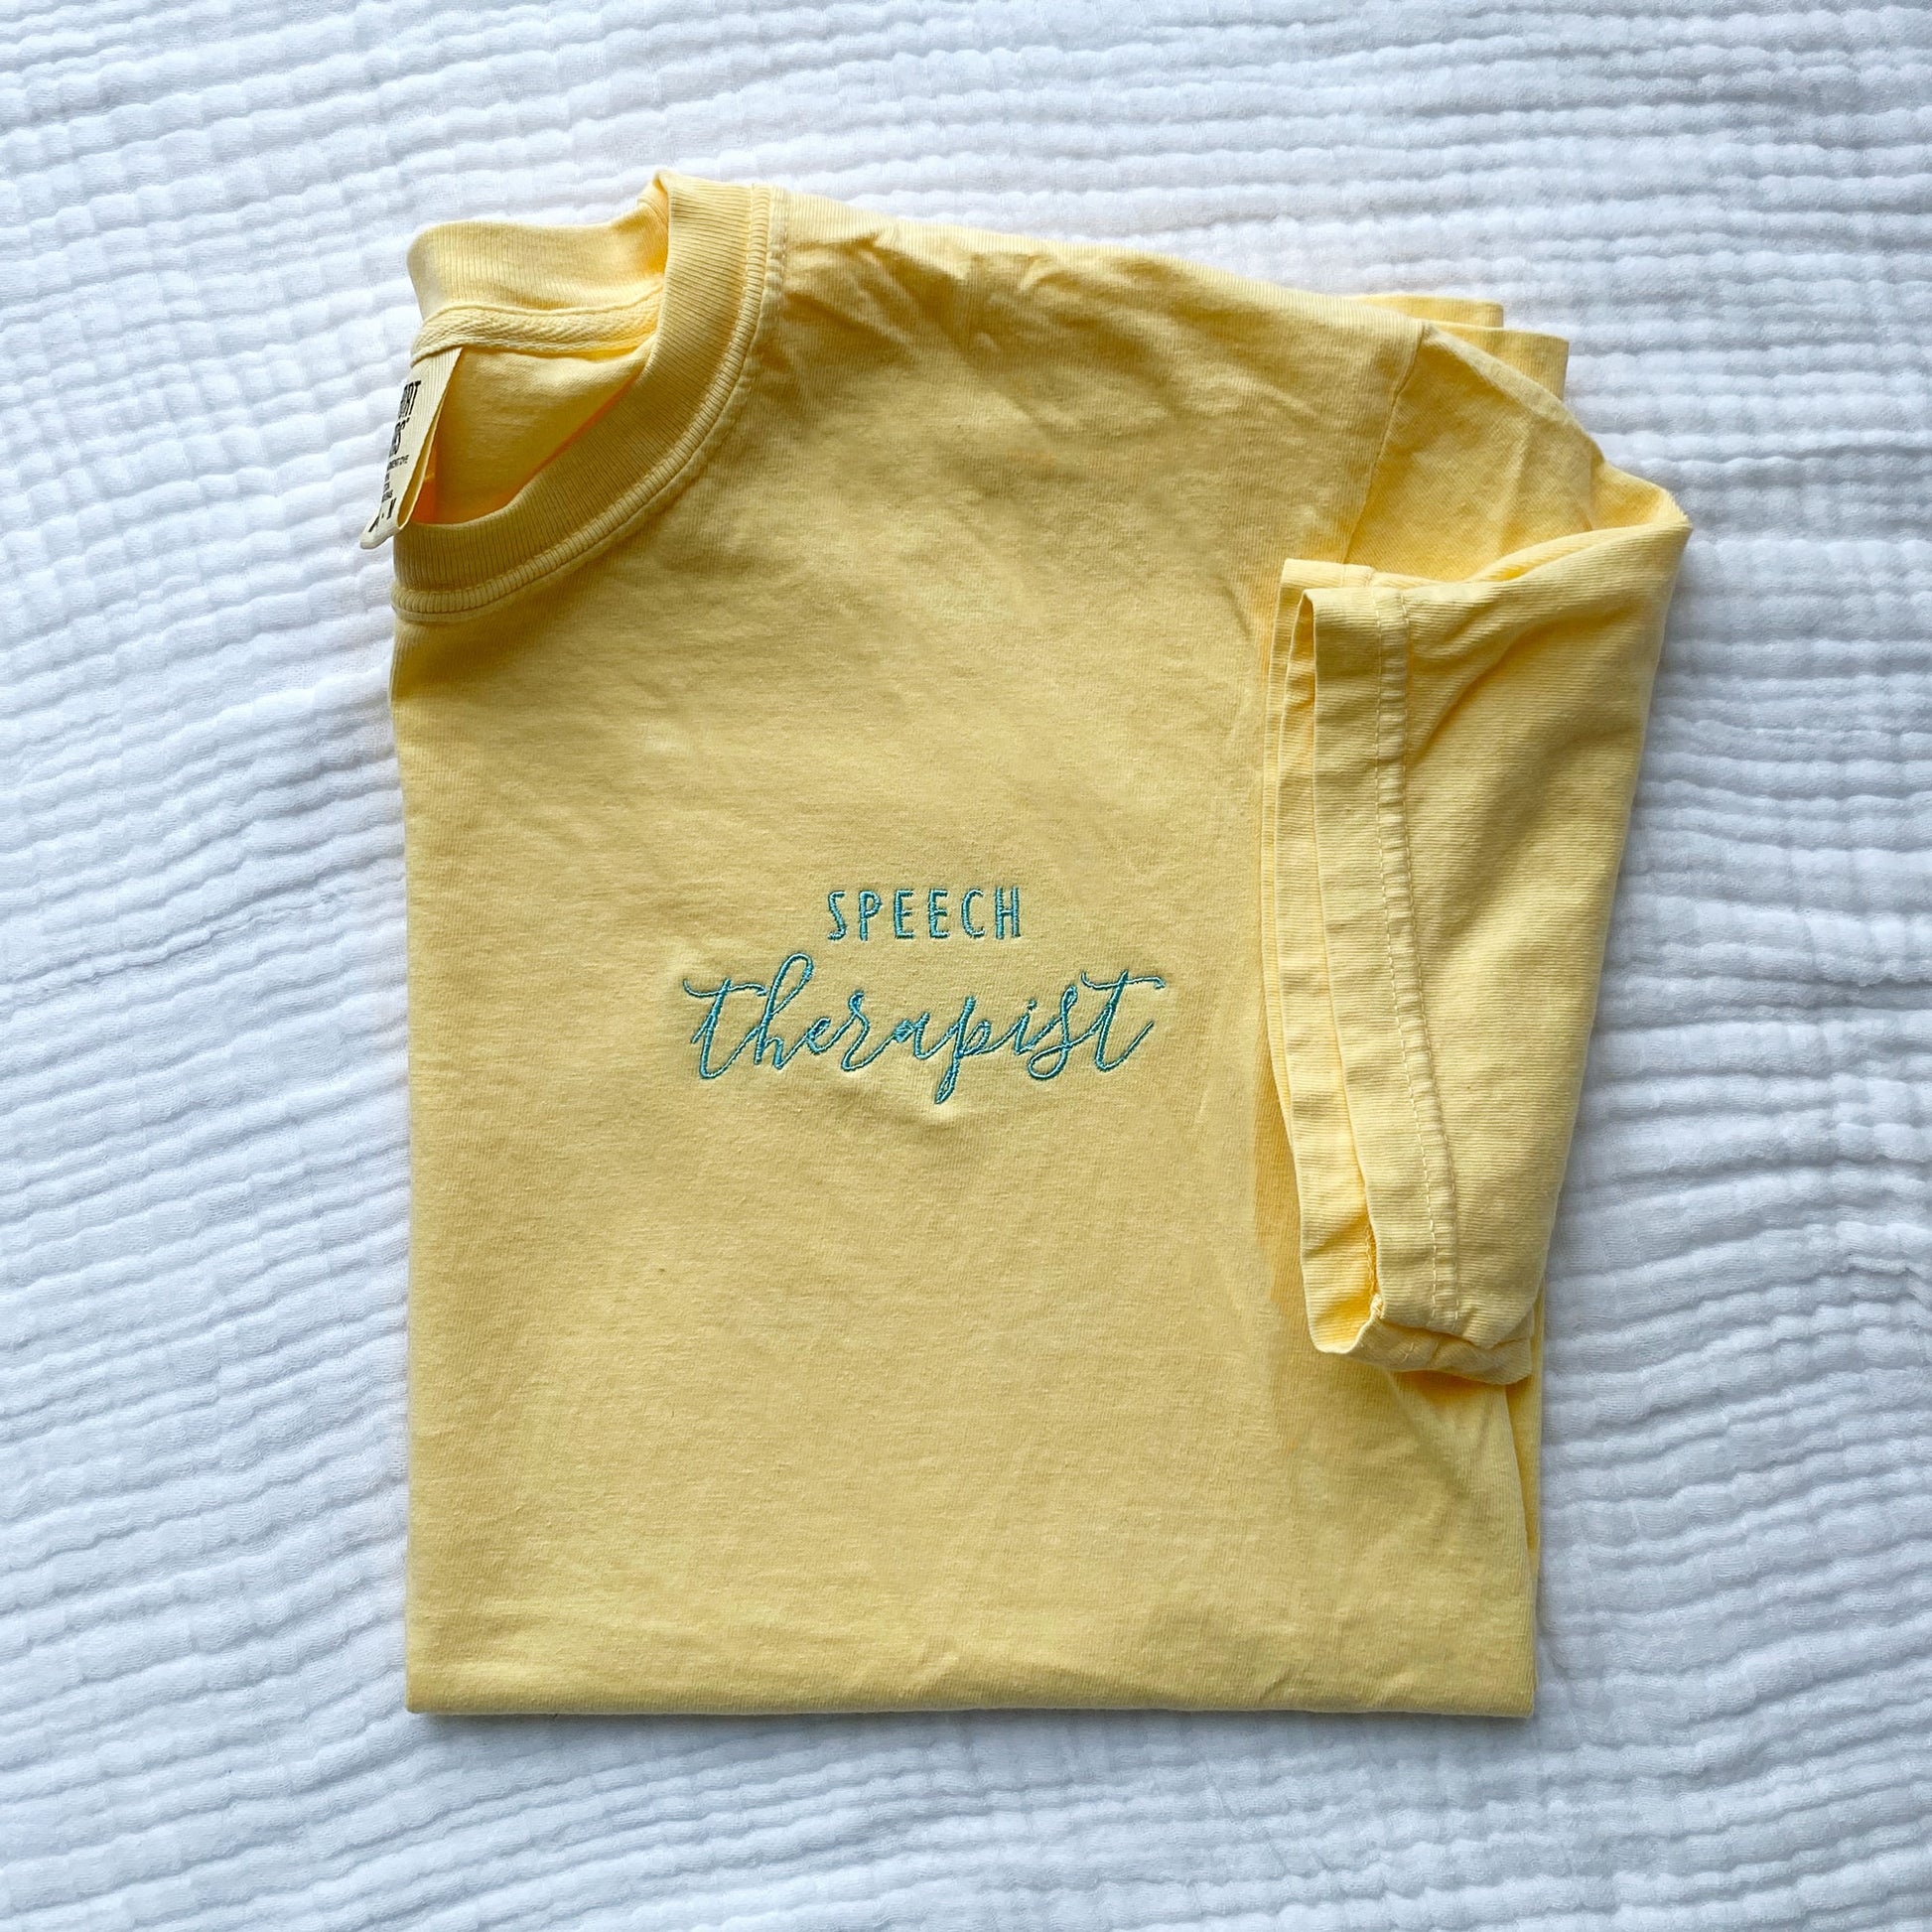 flat lay of a custom embroidered speech therapist design in sky blue thread on a butter yellow comfort colors t-shirt